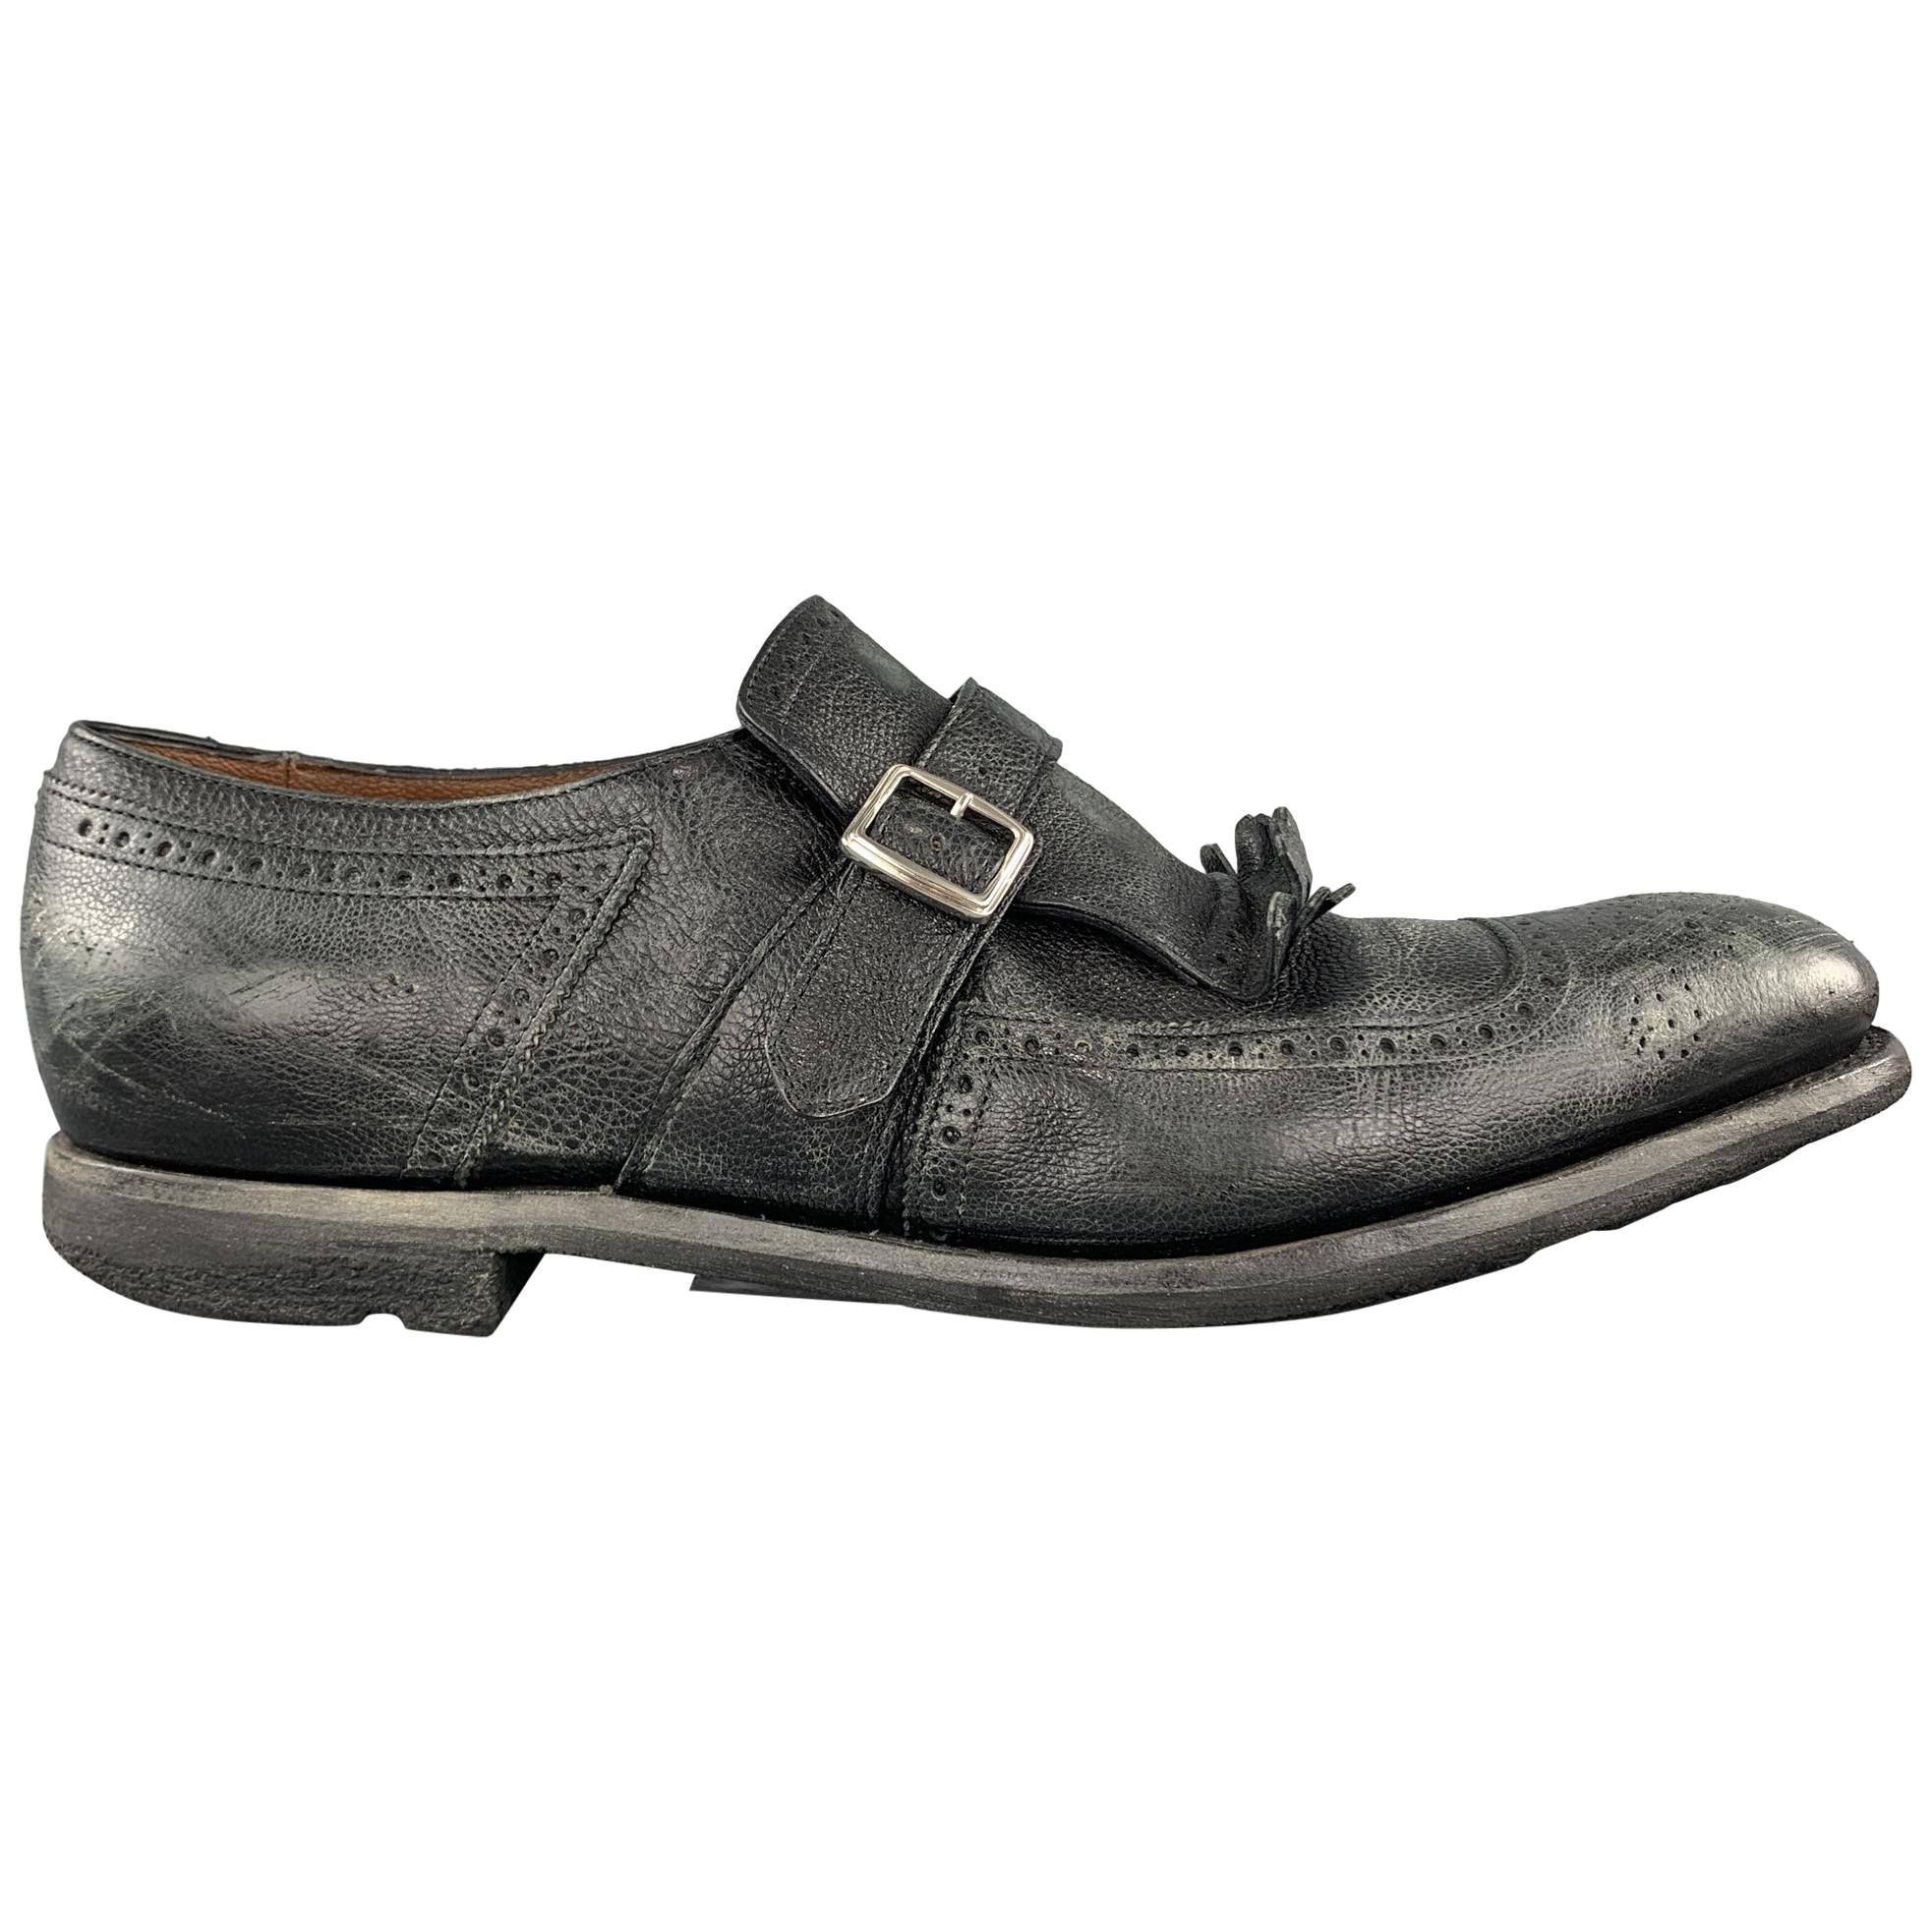 CHURCH'S Size 11 Black Distressed Leather Monk Strap SHANGHAI Eyelash Loafers